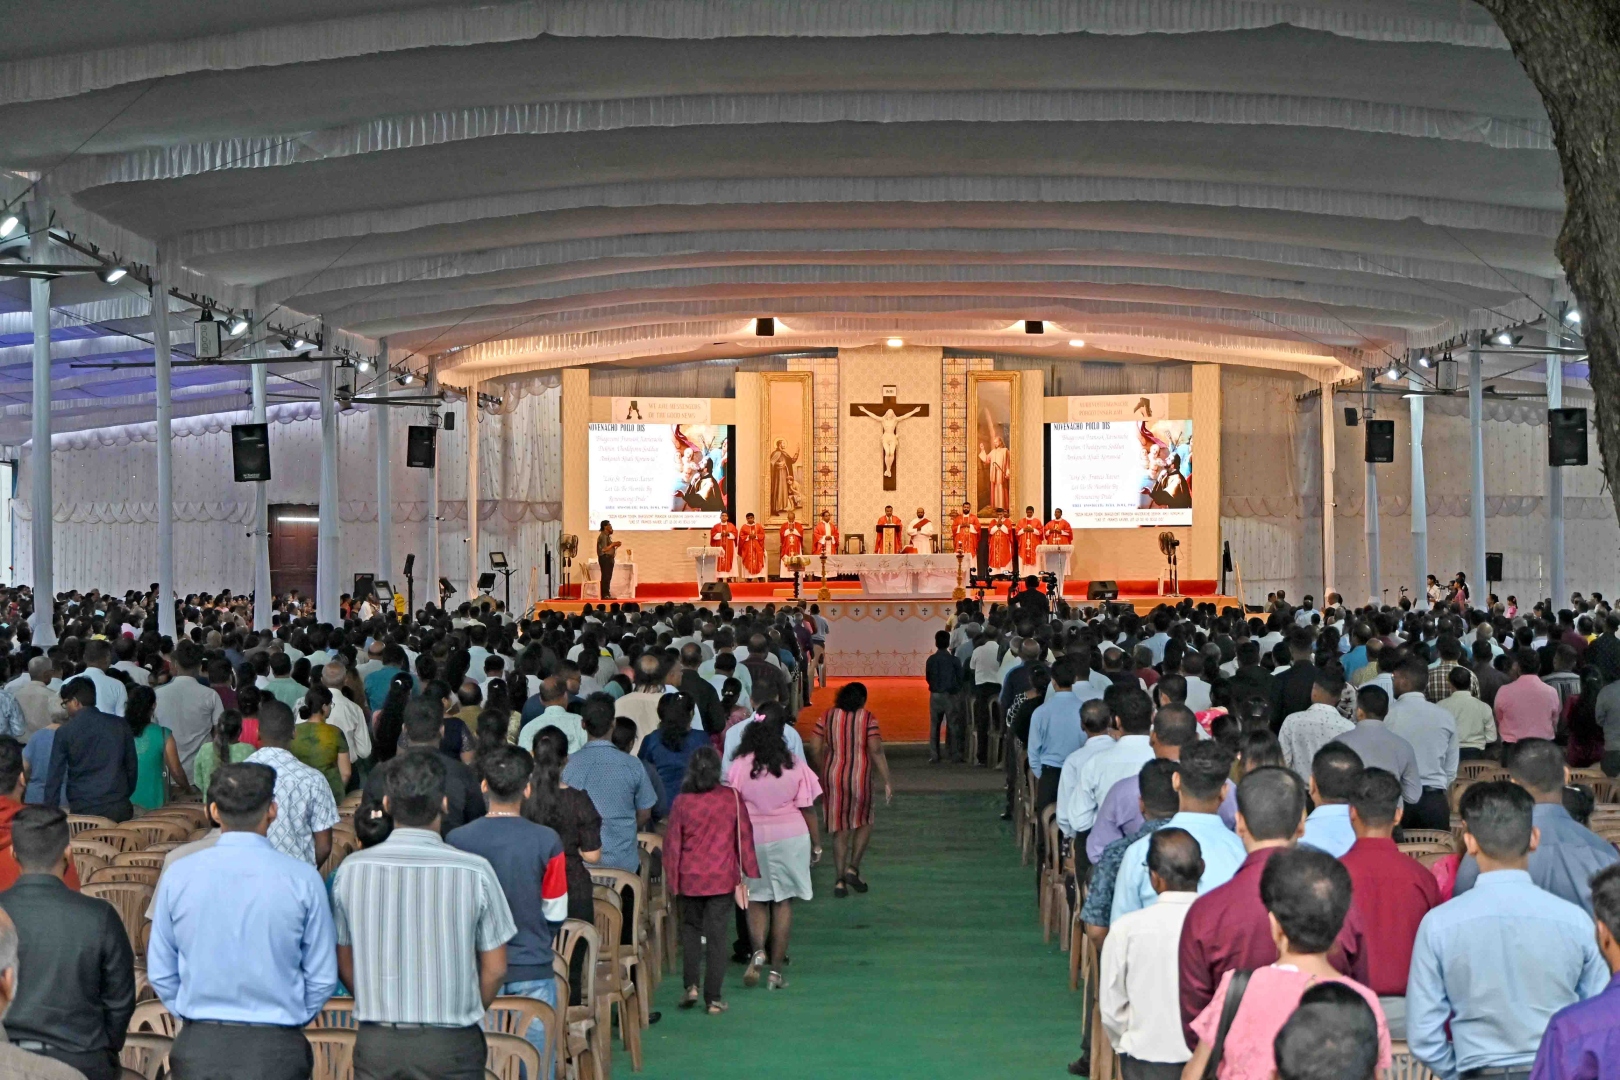 No ID card issue as thousands attend first day of St Francis Xavier novena